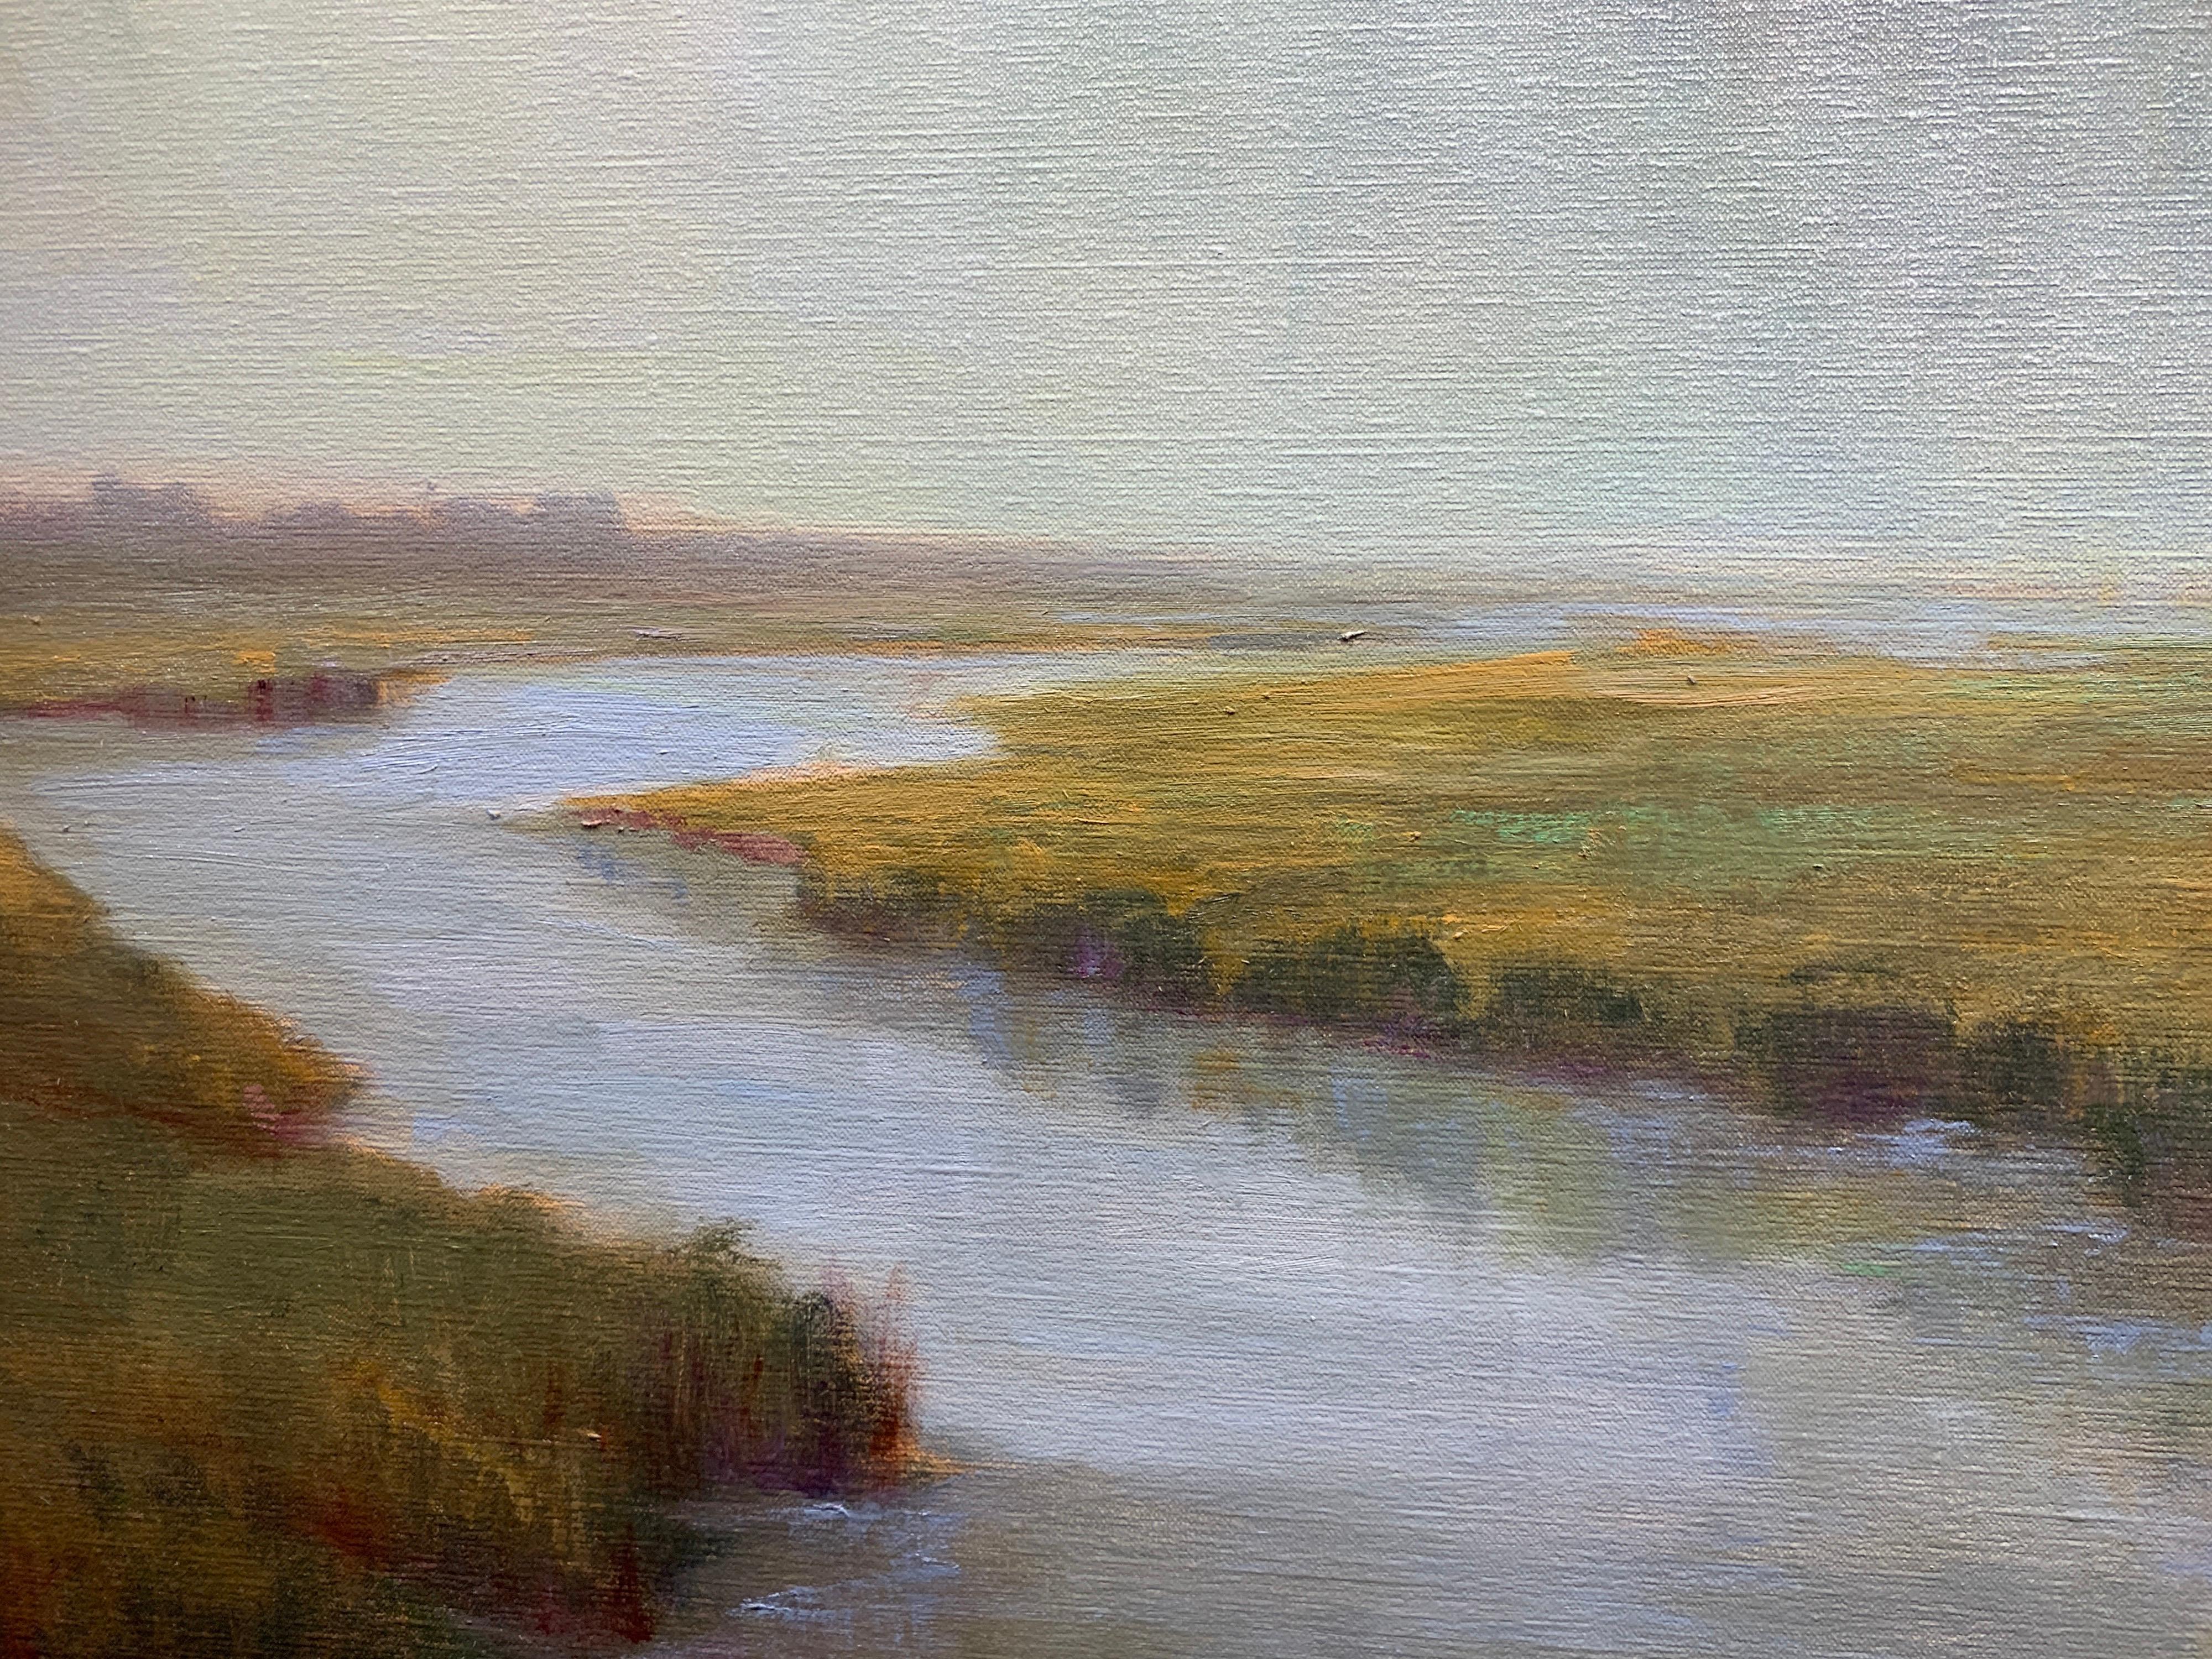 Squall Line Julie Houck, Oil on Linen Post-Impressionist Painting 2